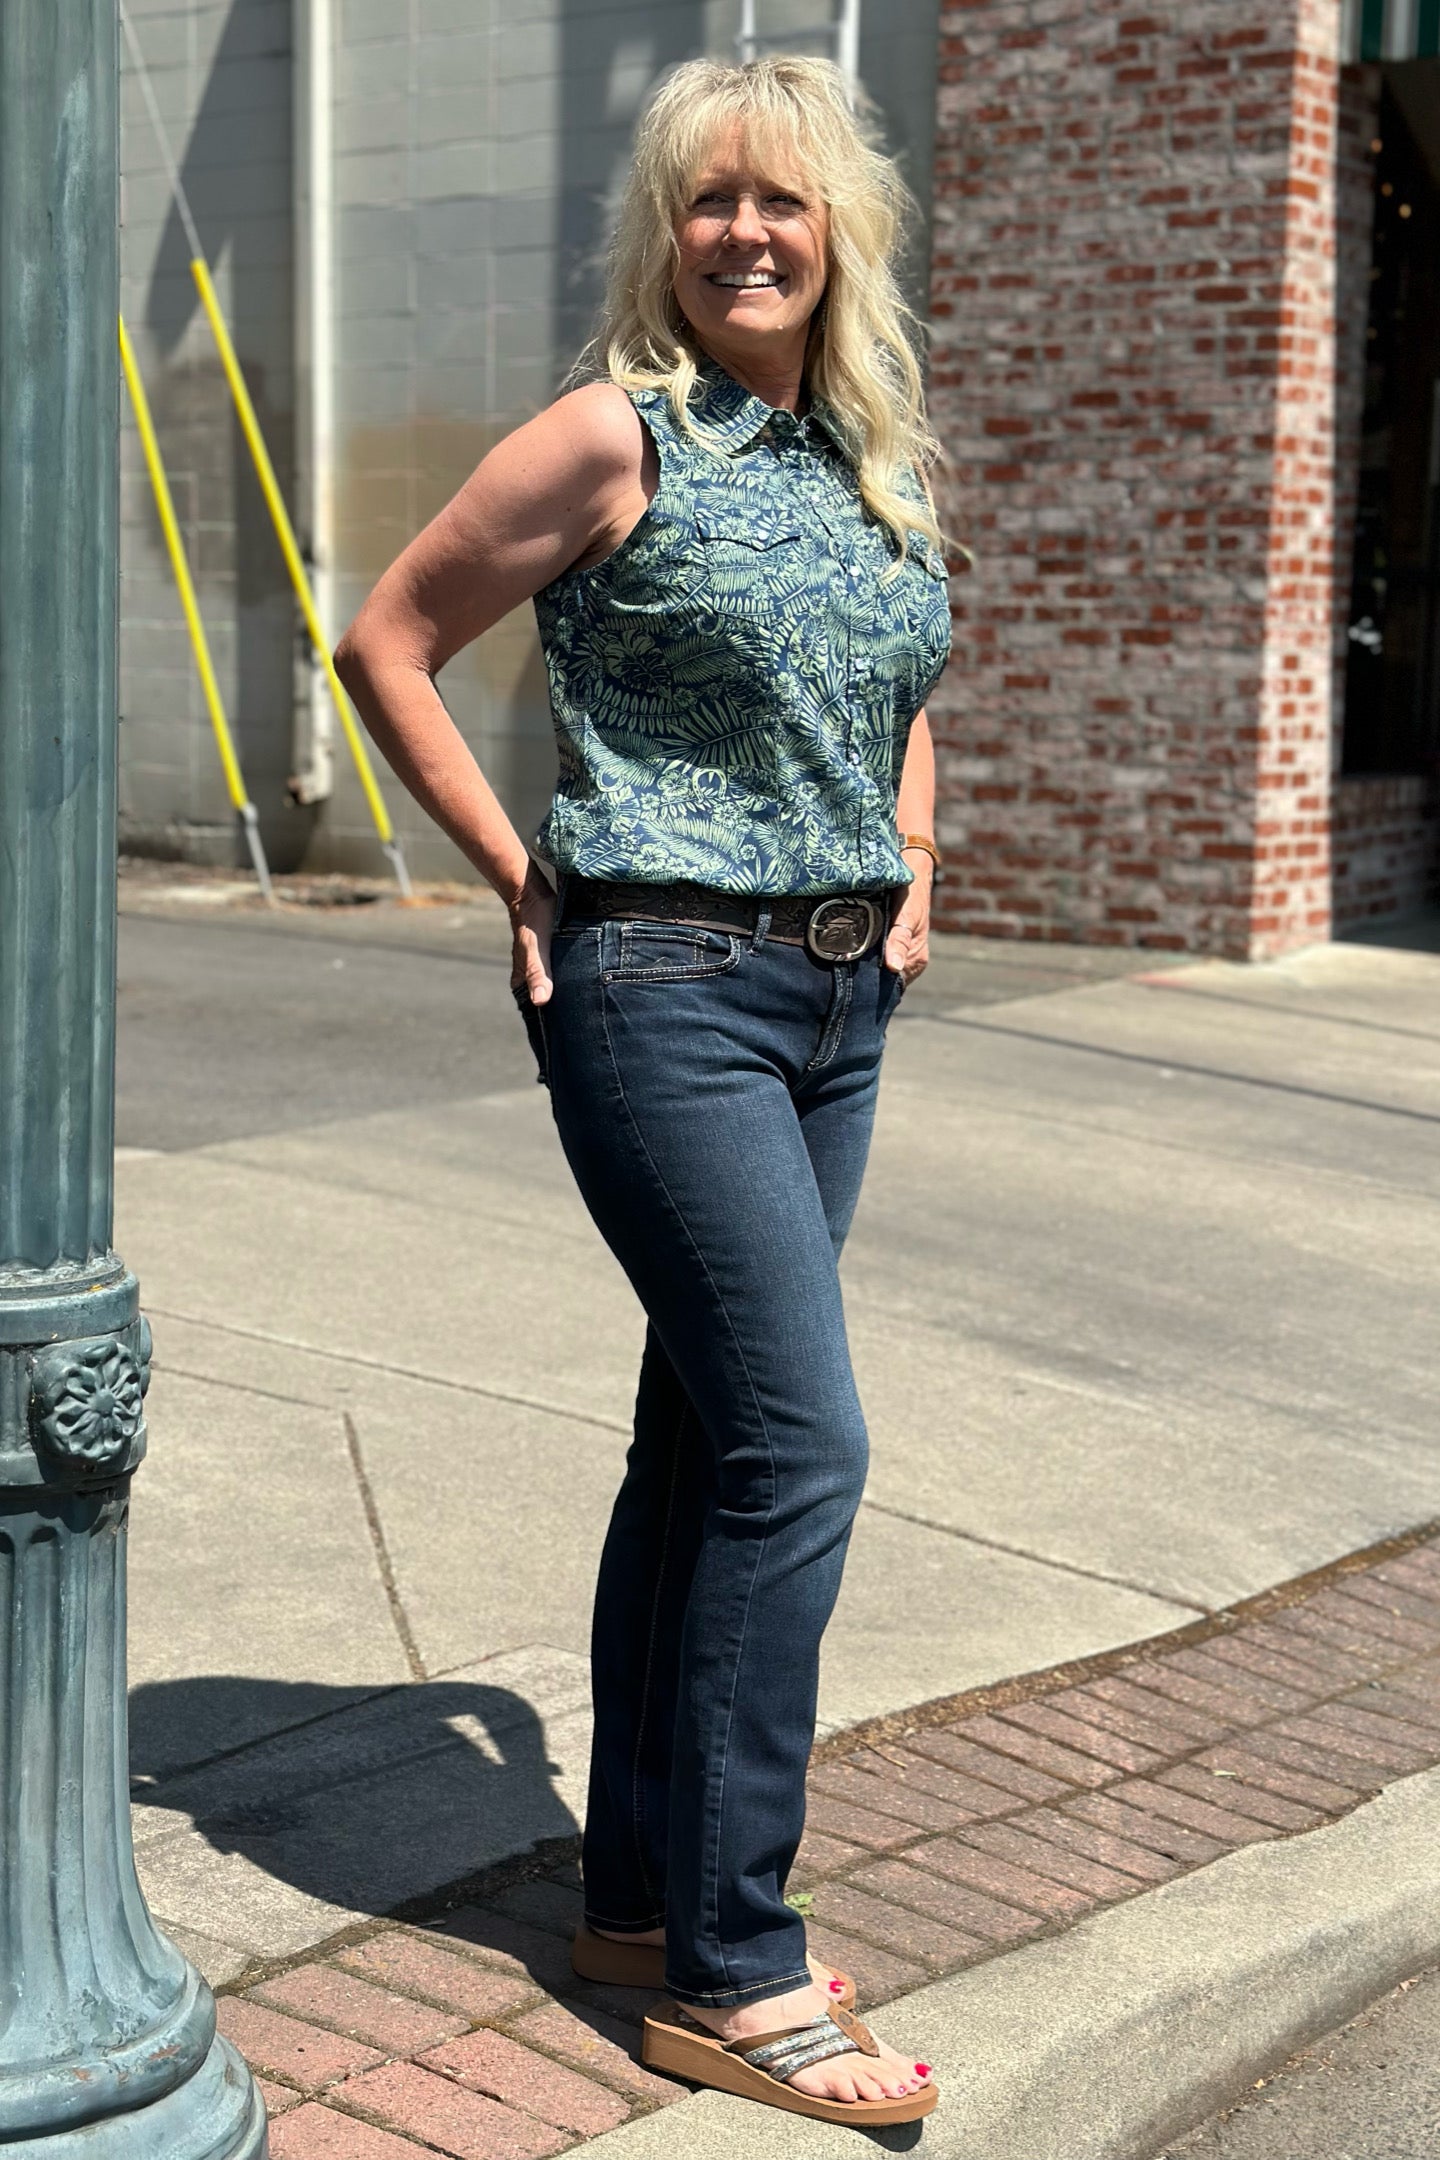 Elyse Mid Rise Straight Leg Jeans by Silver-Straight-Silver Jeans-Gallop 'n Glitz- Women's Western Wear Boutique, Located in Grants Pass, Oregon